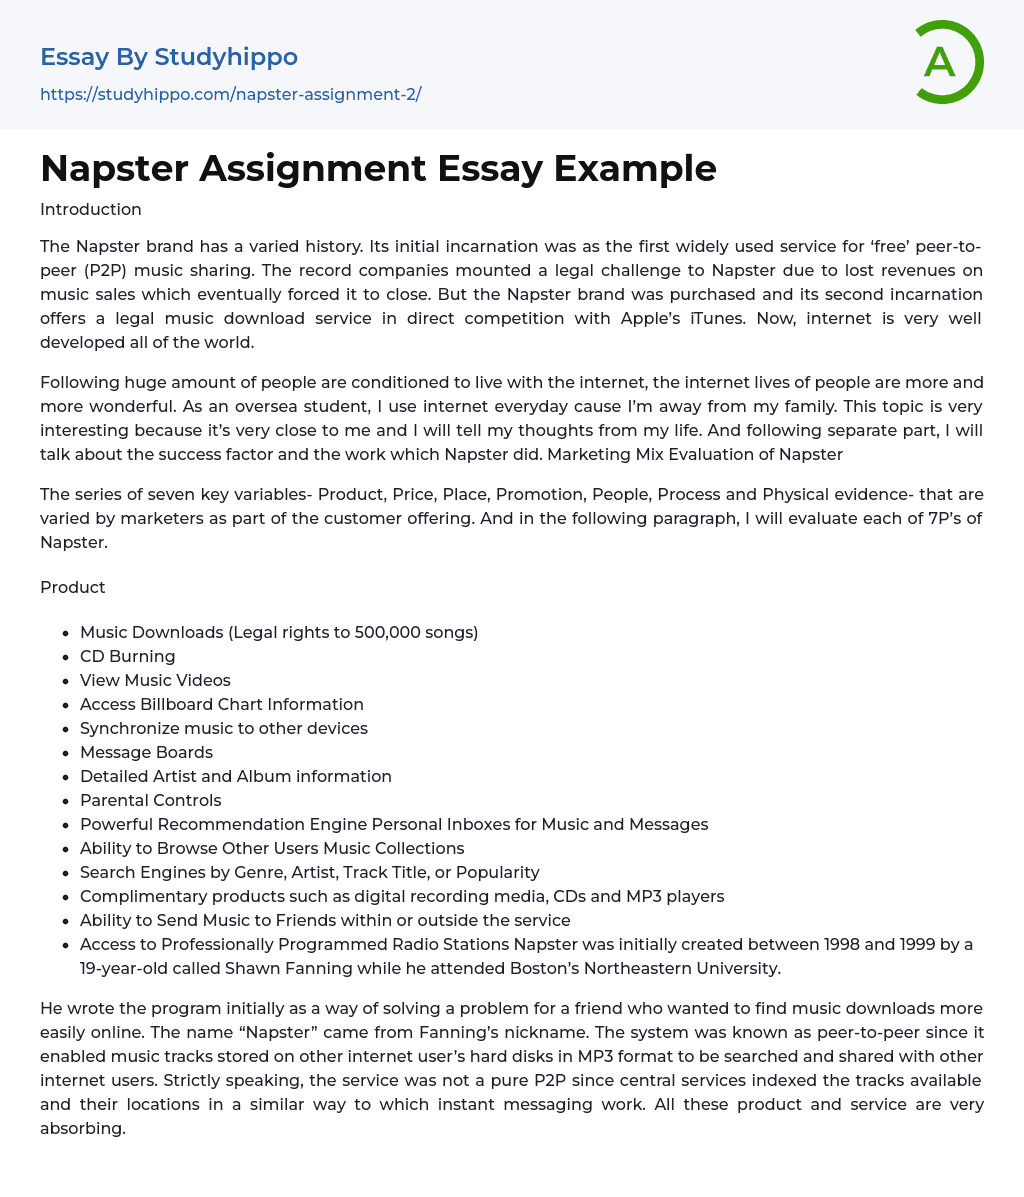 Napster Assignment Essay Example